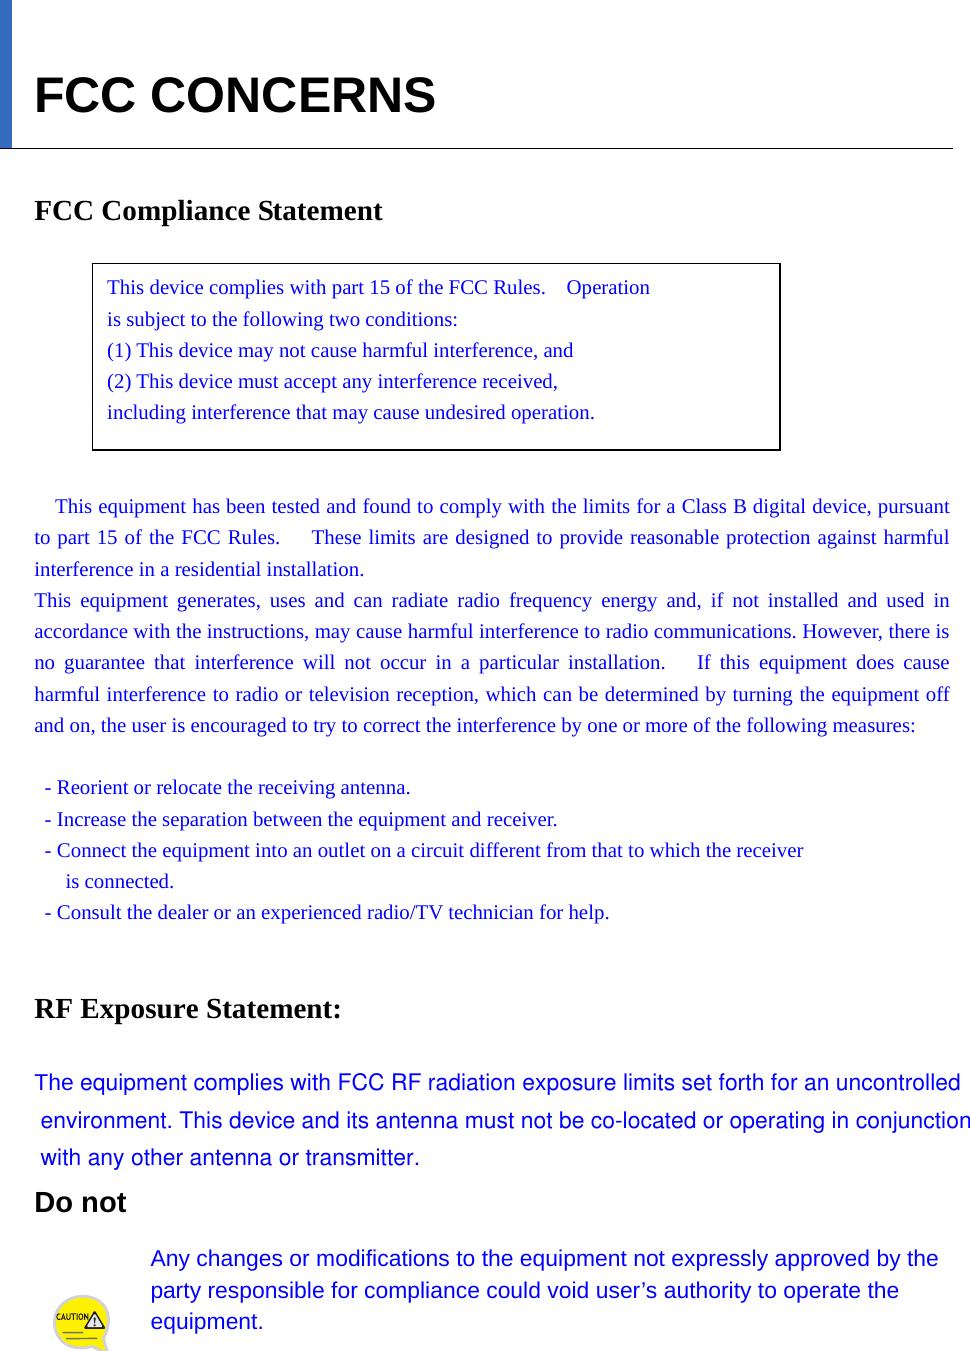   FCC CONCERNS  FCC Compliance Statement      This device complies with part 15 of the FCC Rules.    Operation   is subject to the following two conditions:     (1) This device may not cause harmful interference, and     (2) This device must accept any interference received,     including interference that may cause undesired operation.   This equipment has been tested and found to comply with the limits for a Class B digital device, pursuant to part 15 of the FCC Rules.     These limits are designed to provide reasonable protection against harmful interference in a residential installation. This equipment generates, uses and can radiate radio frequency energy and, if not installed and used in accordance with the instructions, may cause harmful interference to radio communications. However, there is no guarantee that interference will not occur in a particular installation.   If this equipment does cause harmful interference to radio or television reception, which can be determined by turning the equipment off and on, the user is encouraged to try to correct the interference by one or more of the following measures:    - Reorient or relocate the receiving antenna.   - Increase the separation between the equipment and receiver.   - Connect the equipment into an outlet on a circuit different from that to which the receiver   is connected.   - Consult the dealer or an experienced radio/TV technician for help.   RF Exposure Statement:  The equipment complies with FCC RF radiation exposure limits set forth for an uncontrolled environment. This device and its antenna must not be co-located or operating in conjunction with any other antenna or transmitter.Do not   Any changes or modifications to the equipment not expressly approved by the party responsible for compliance could void user’s authority to operate the equipment. 